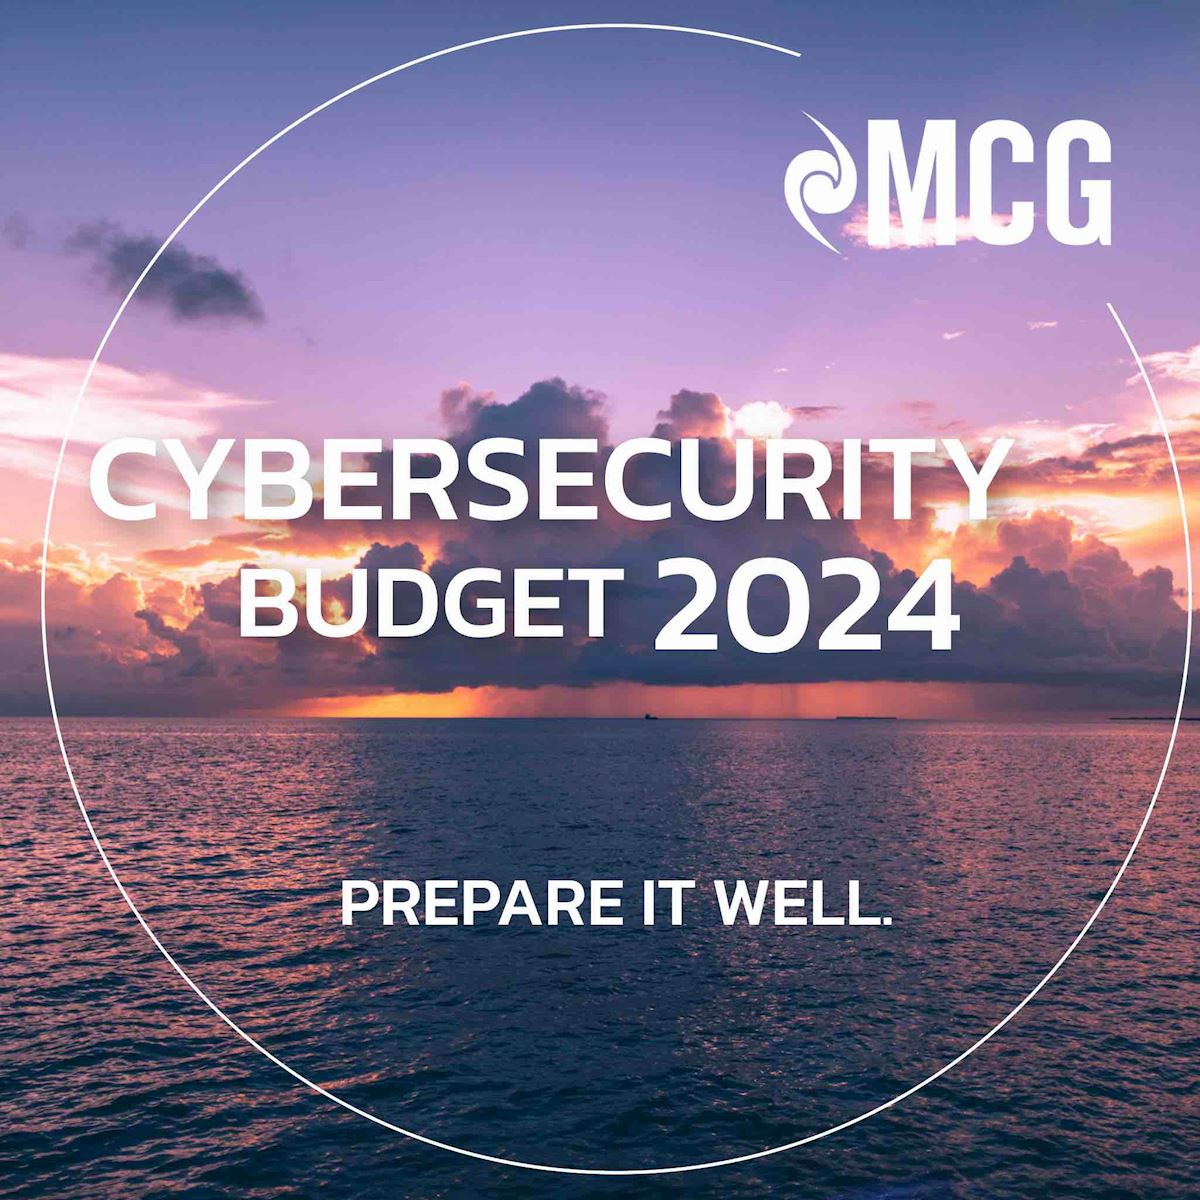 Cybersecurity budget: an illusion touching you. How to prepare it well...